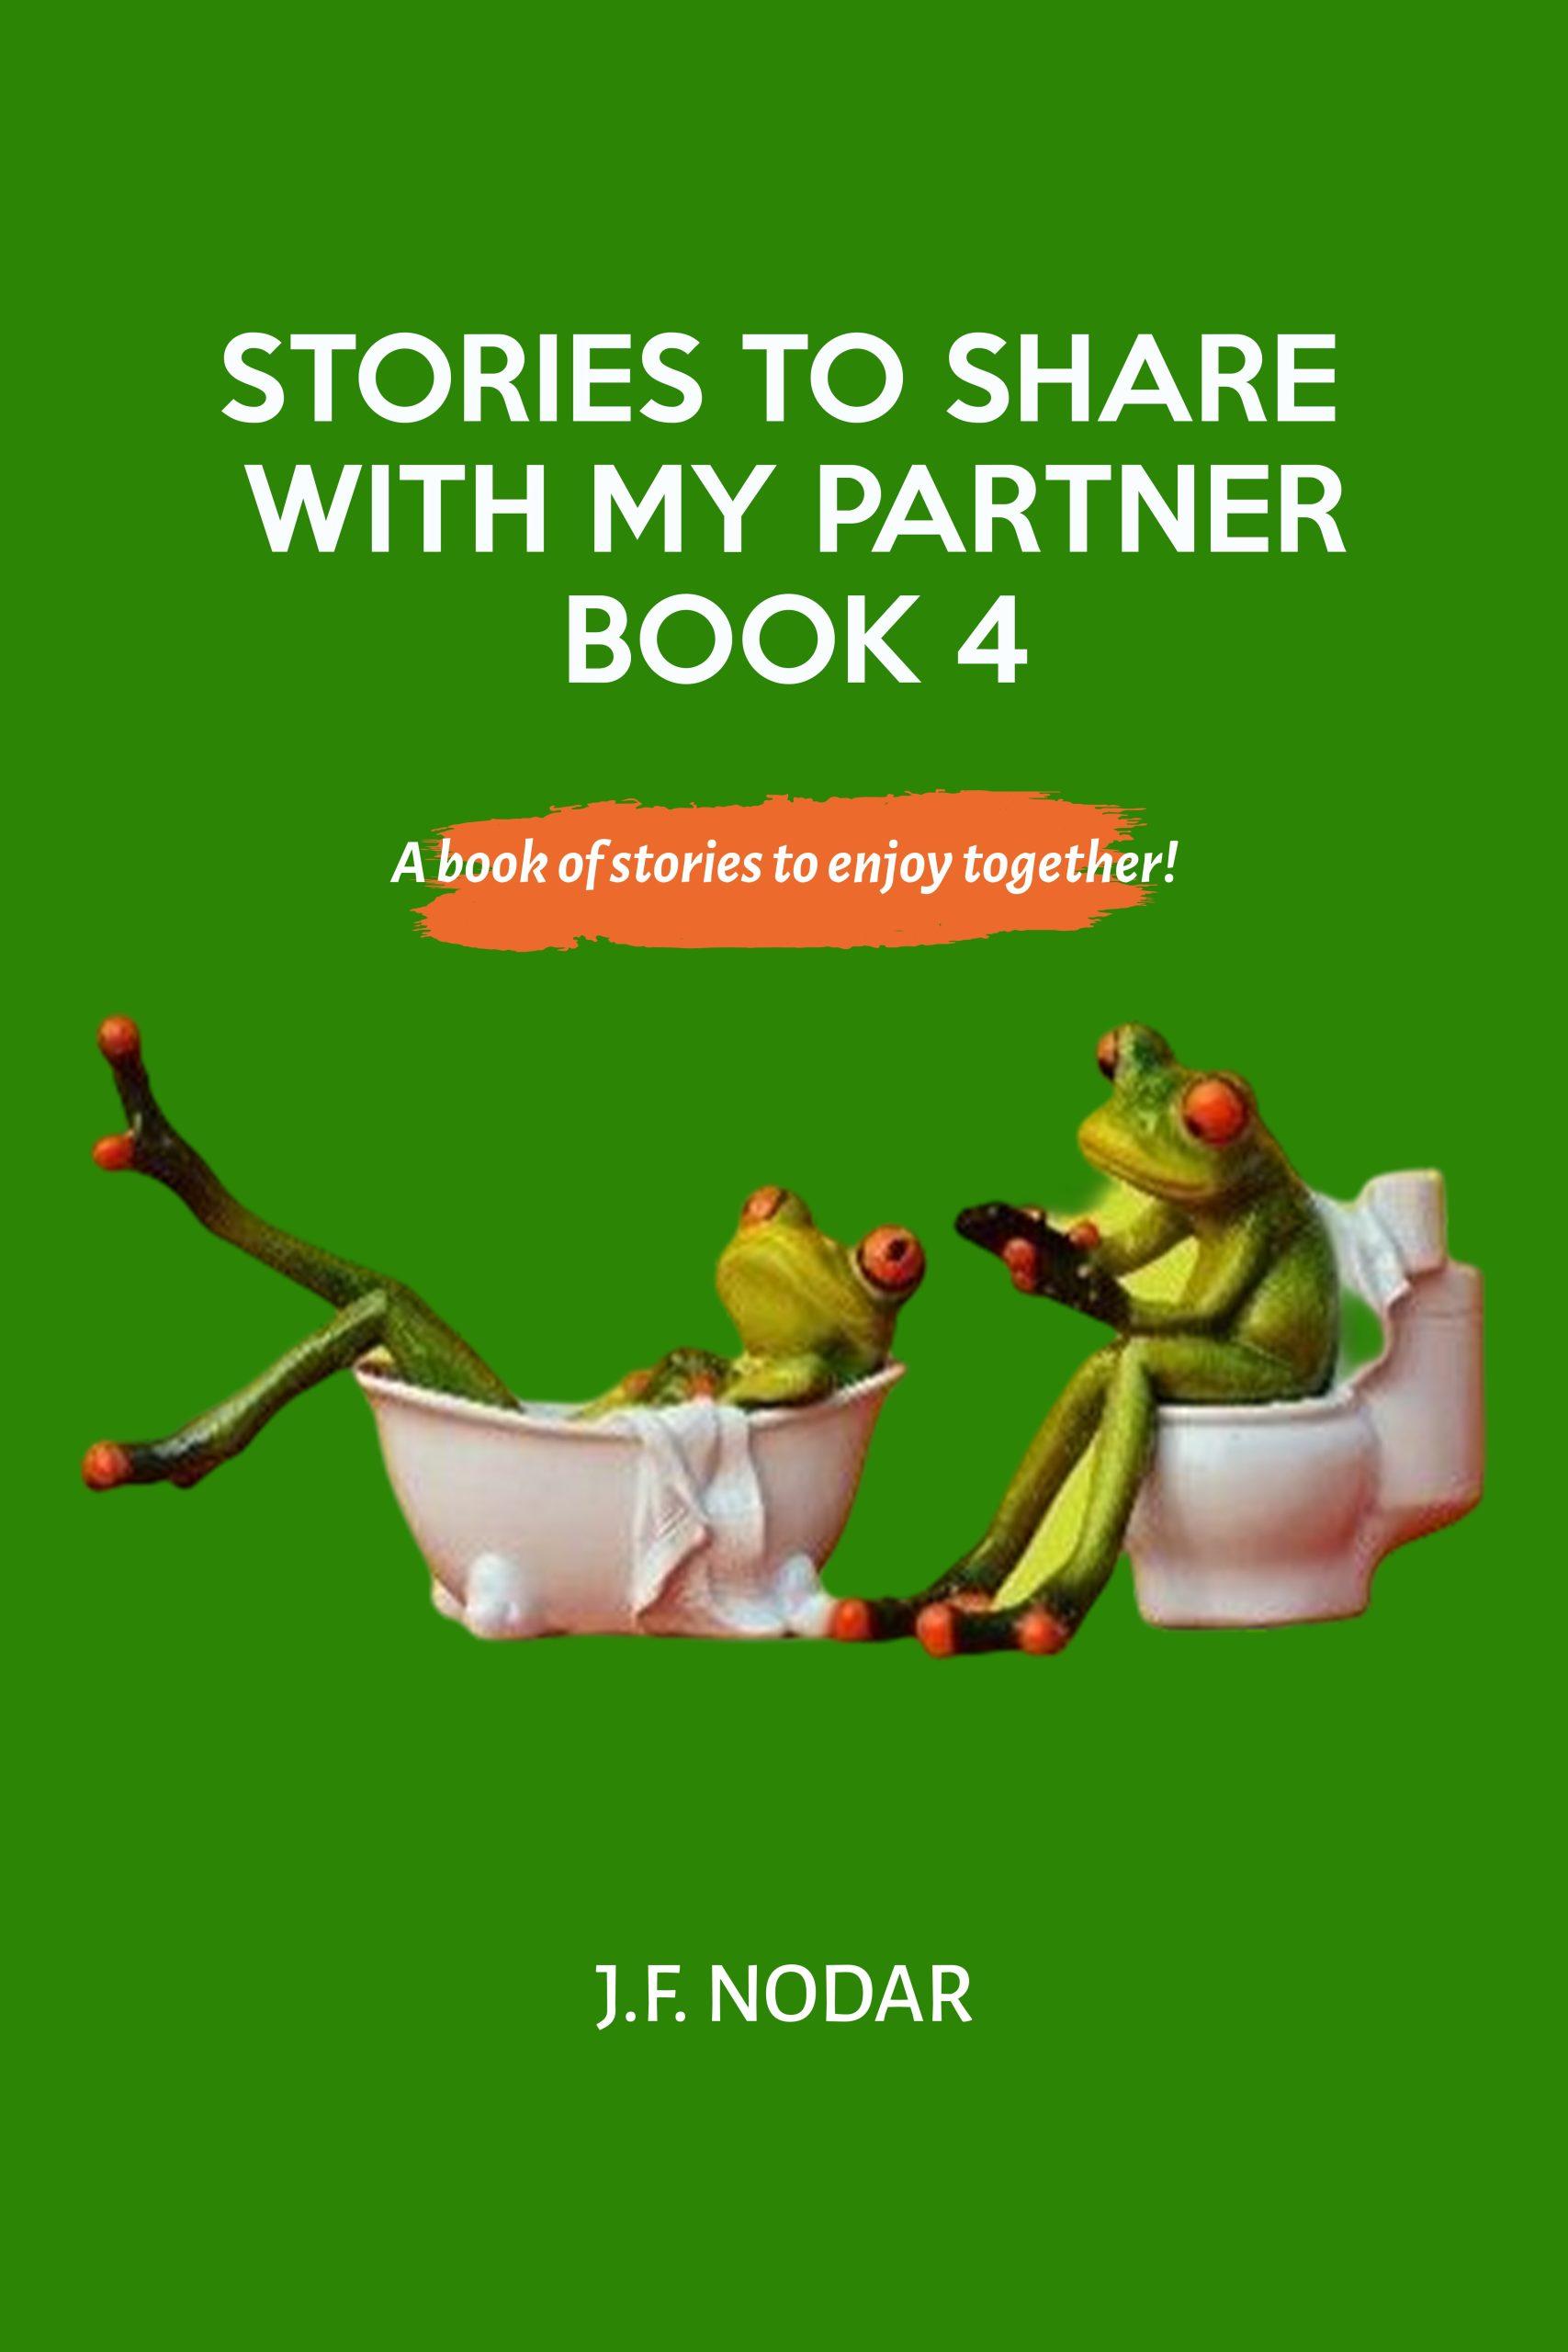 Stories to Share With My Partner - Book 4